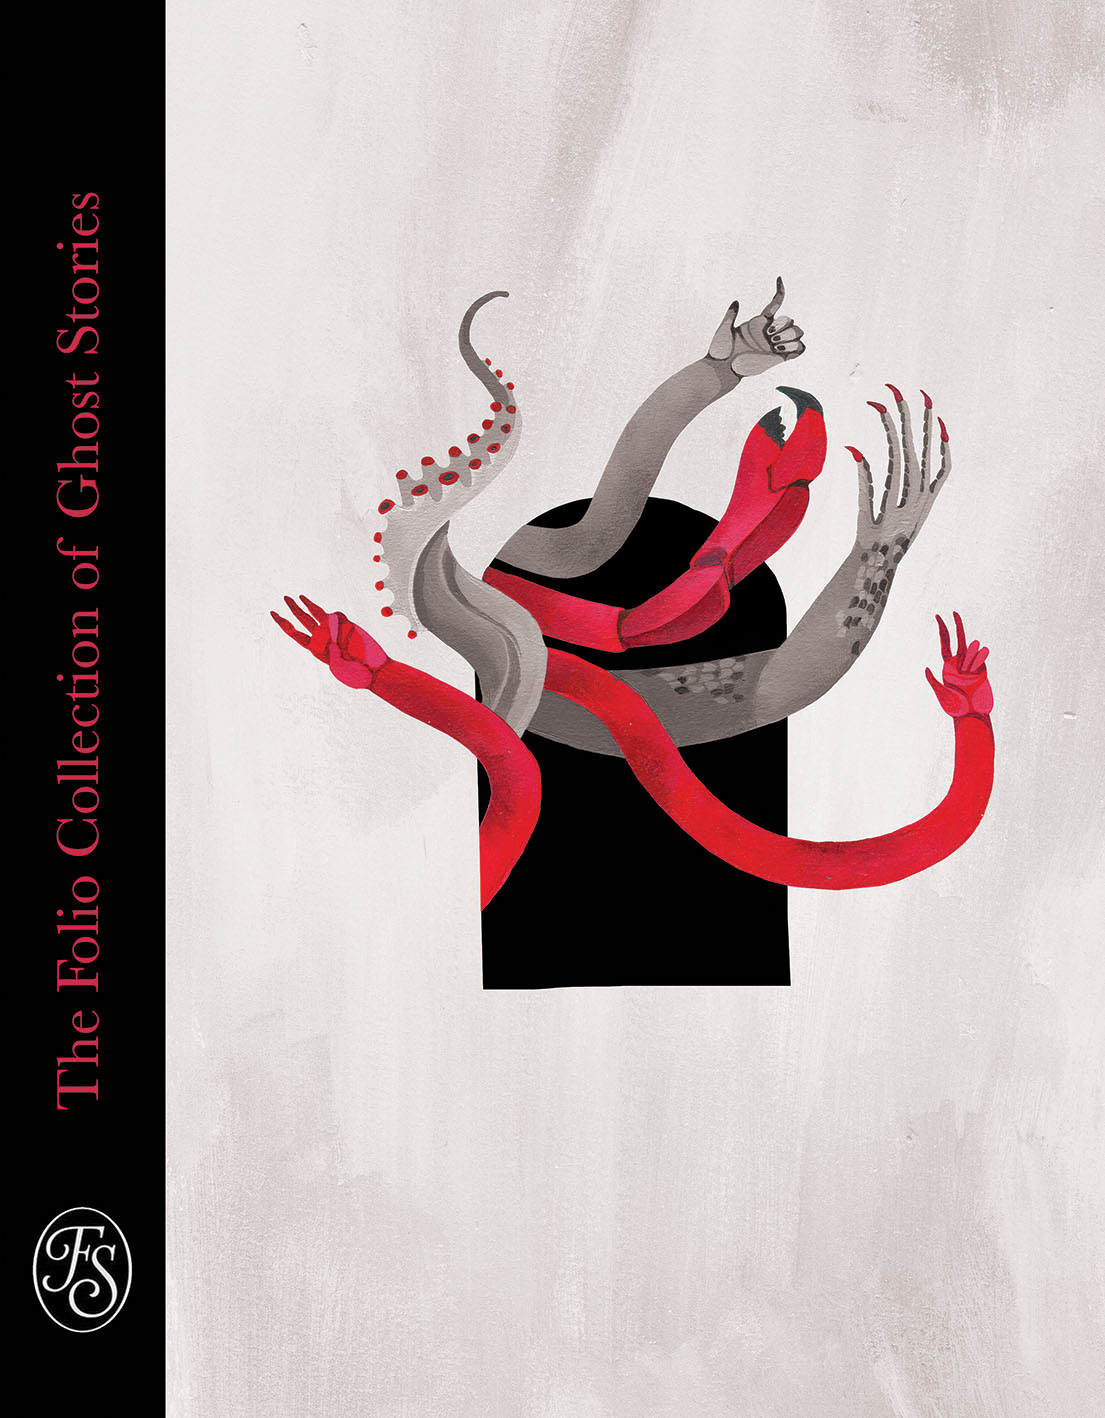 book illustration Competition folio society Character